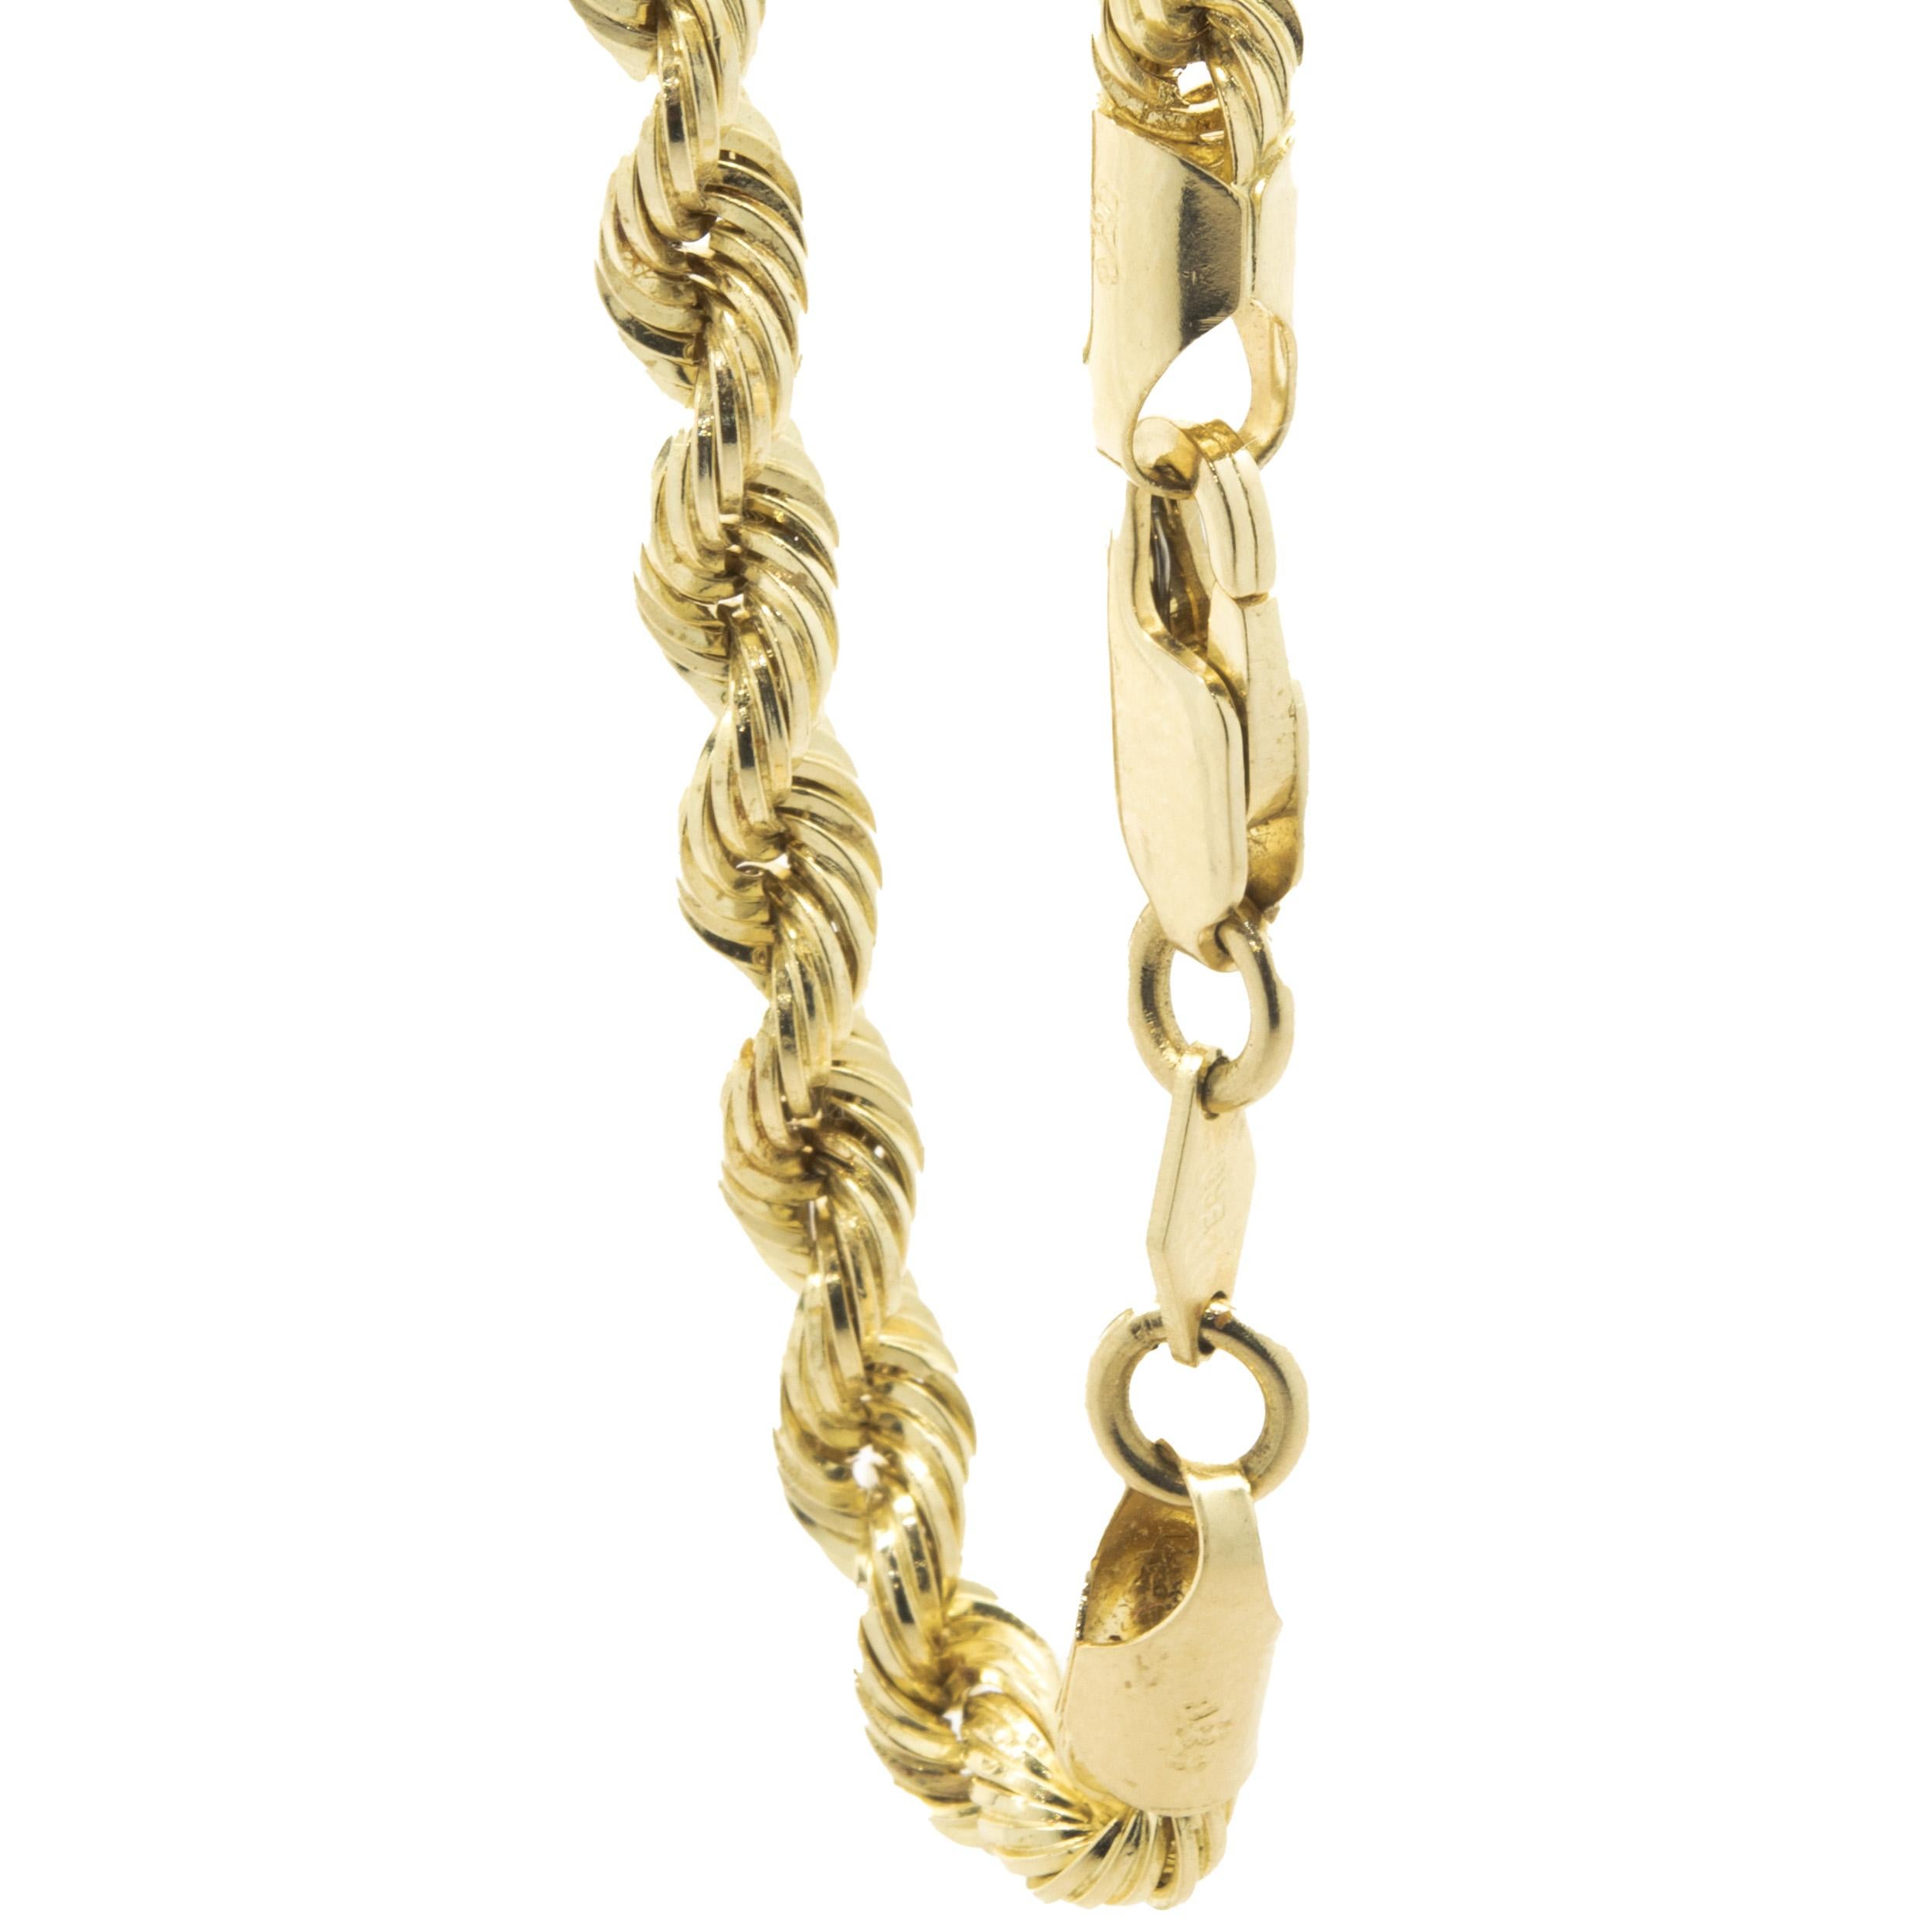 Material: 14K yellow gold
Dimensions: bracelet will fit up to an 7-inch wrist
Weight: 3.88 grams
